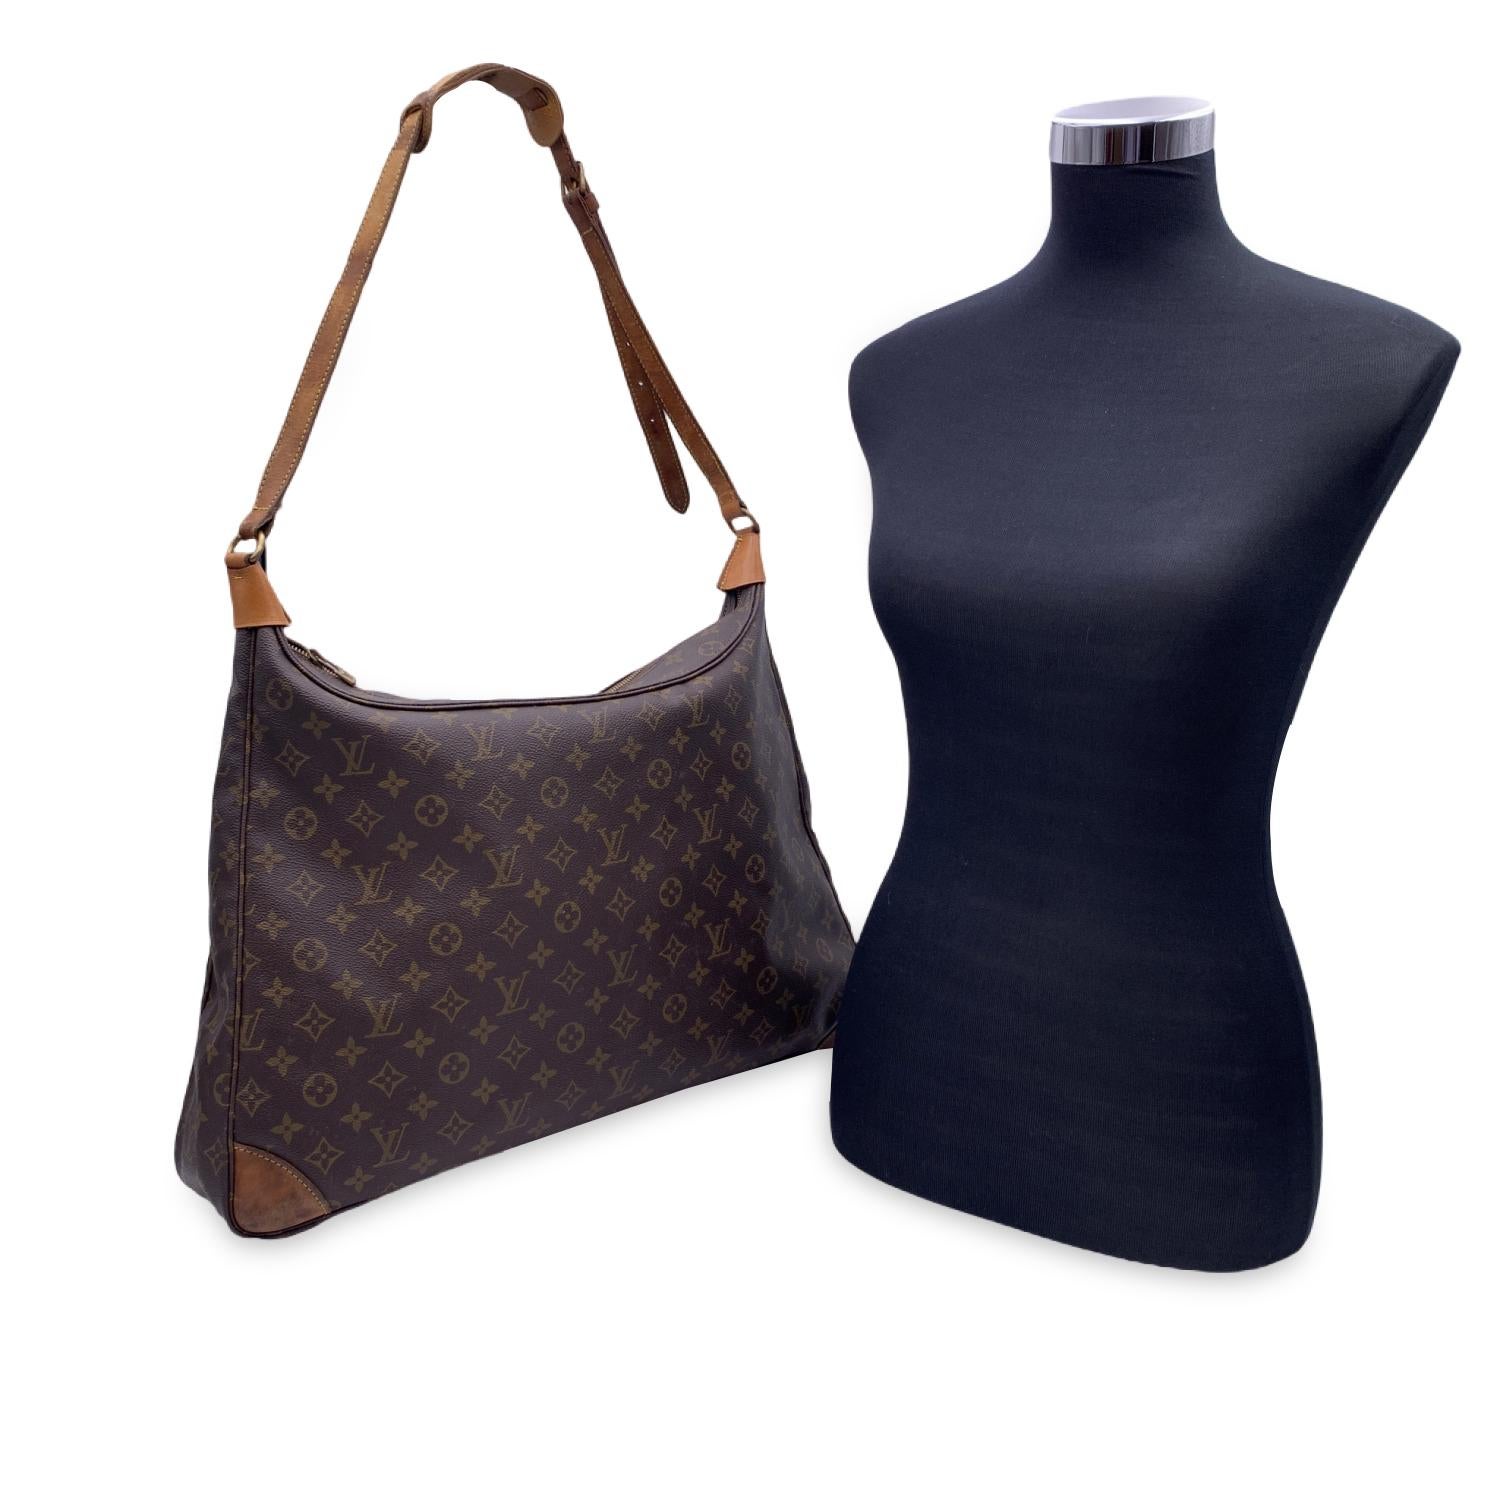 Beautiful Louis Vuitton Vintage Monogram Boulogne 50 XL shoulder bag crafted in monogram canvas with genuine leather trim and shoulder strap. Upper zipper opens to a brown fabric interior. Extra-large hobo design version of the iconic Boulogne bag,